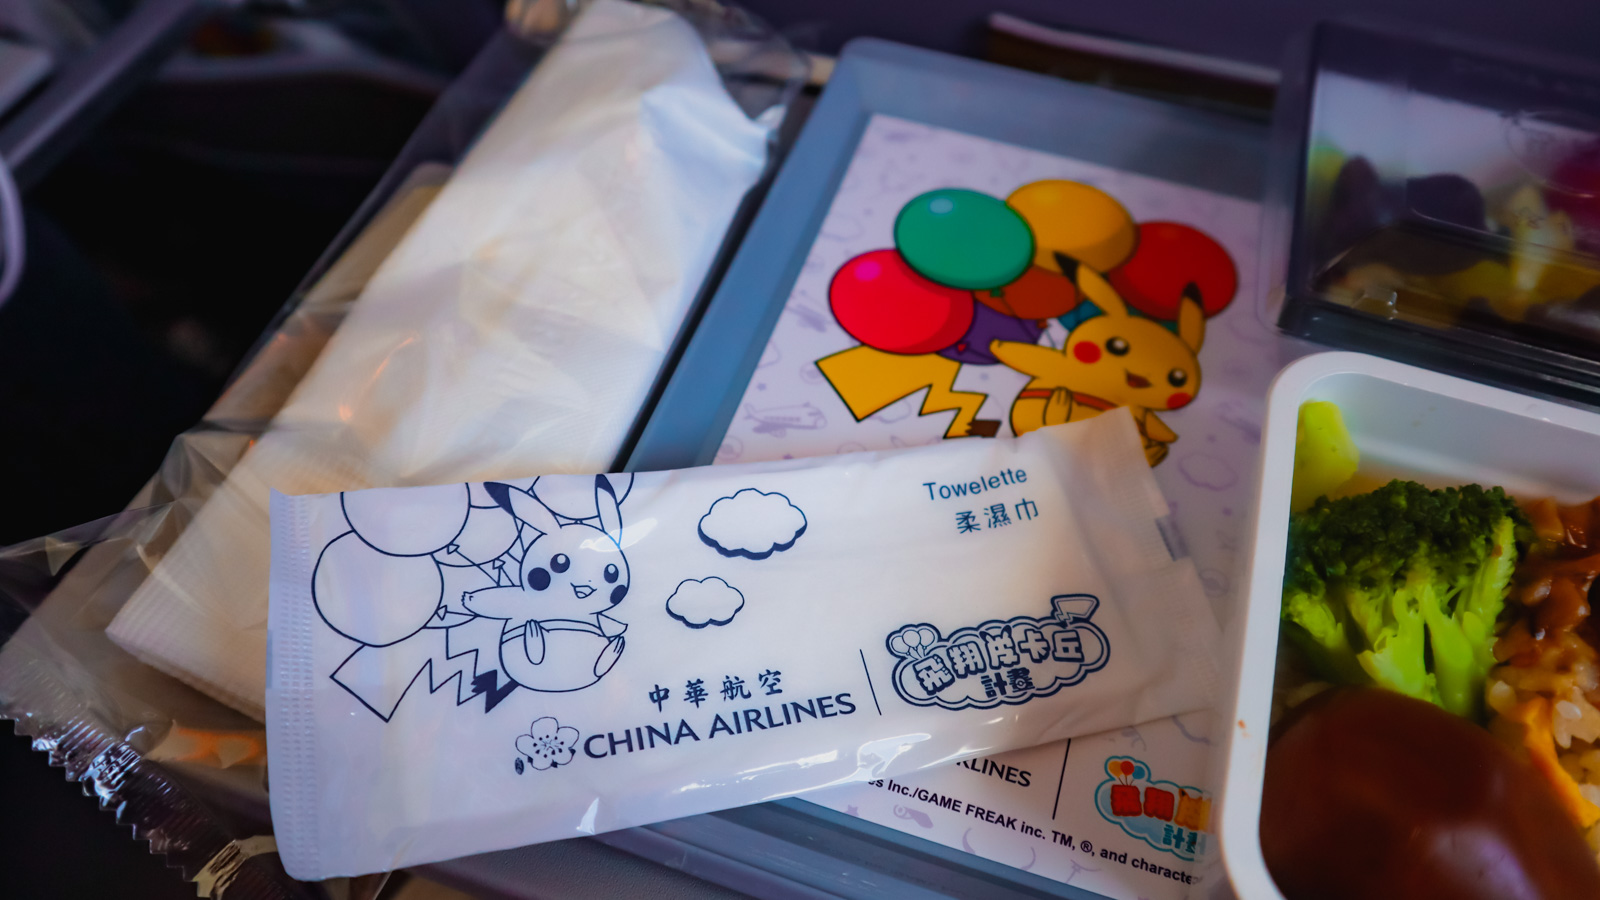 Towelette on China Airlines Pokemon plane